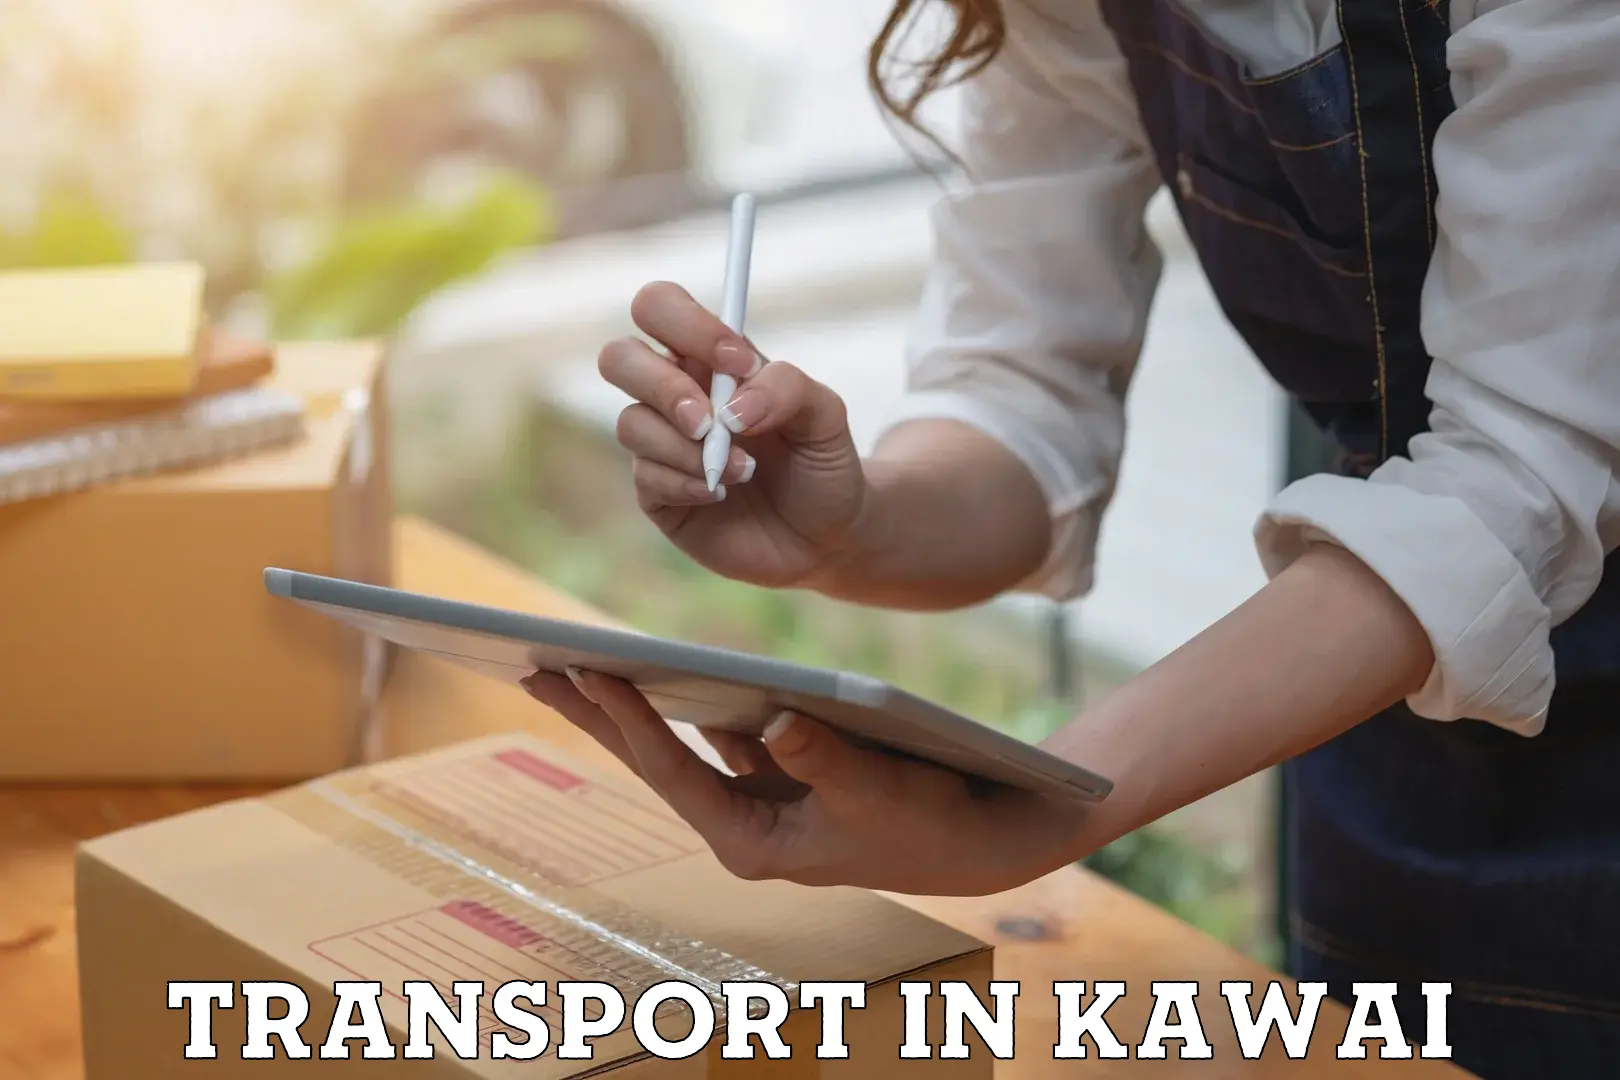 Daily parcel service transport in Kawai